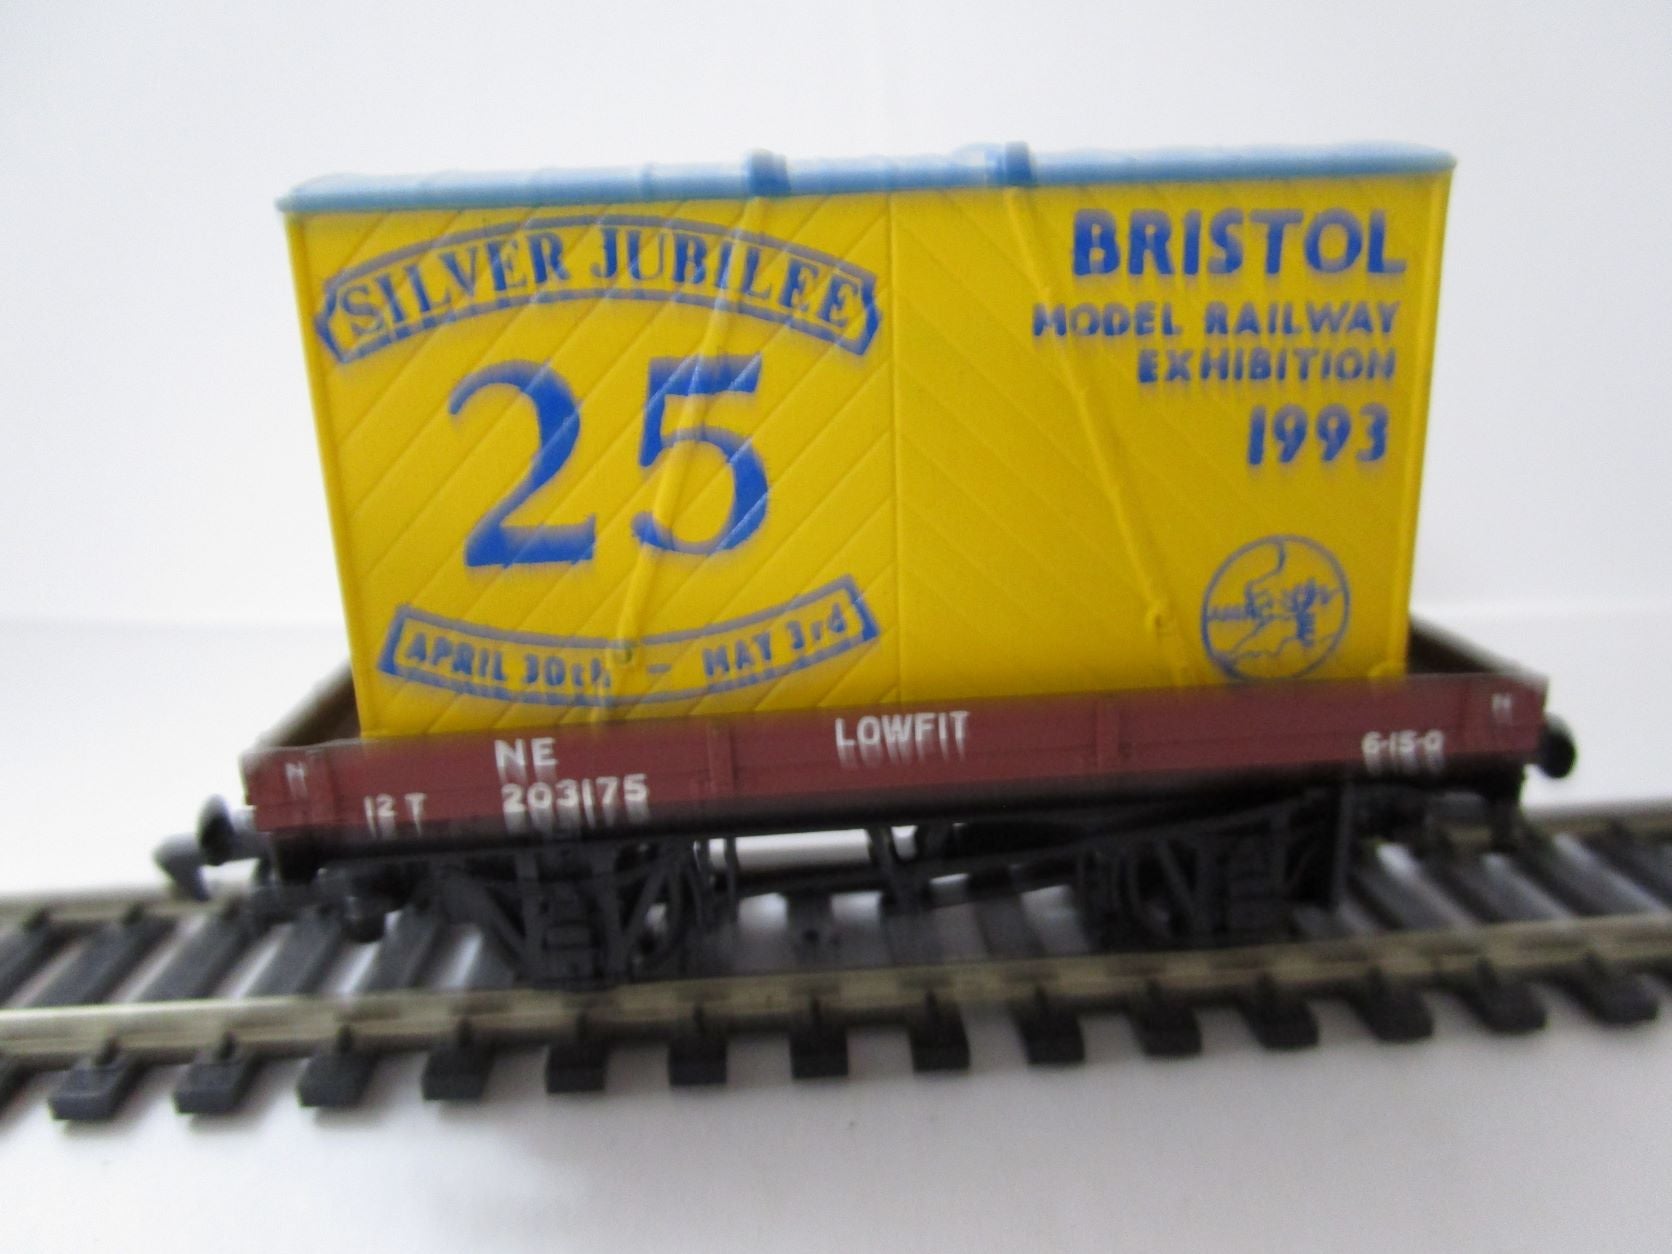 B000BRISTOLMRE DAPOL Conflat with Bristol Model Railway 1993 Silver Jubilee Exhibition Container